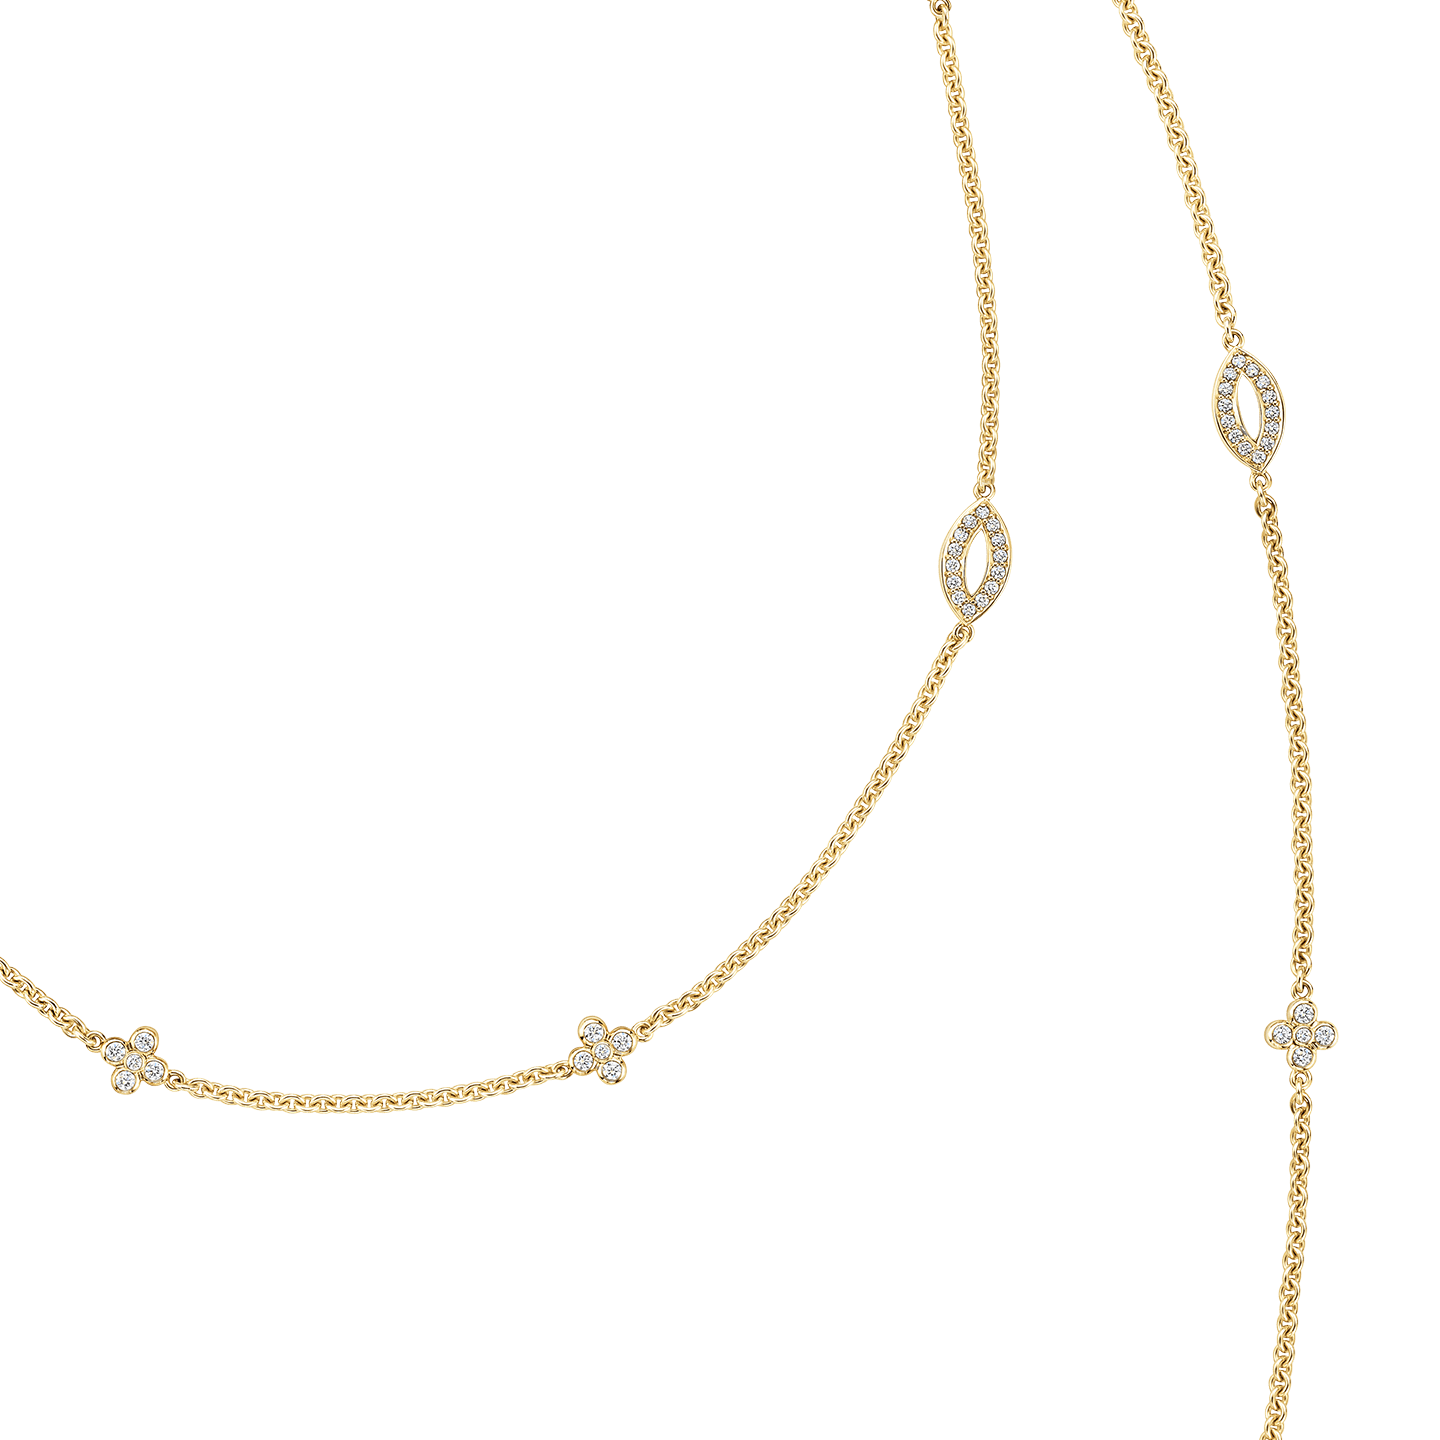 Lily Cluster Diamond Sautoir Necklace in Yellow Gold, Product Image 4